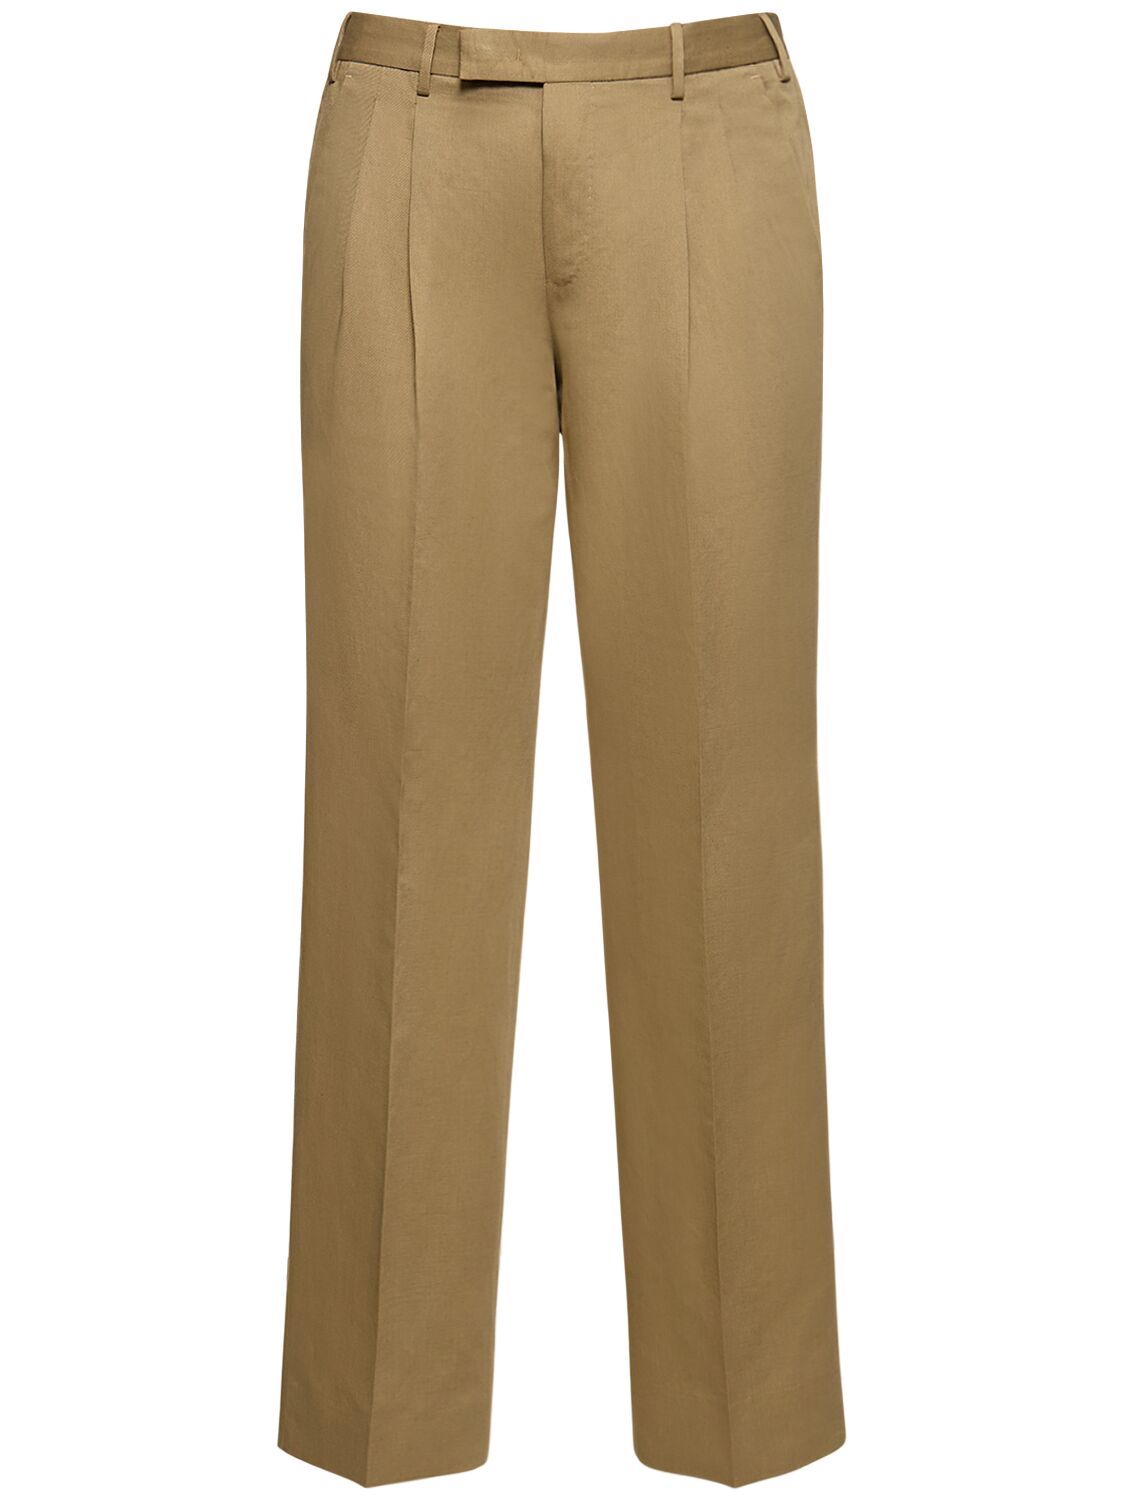 Image of Diciannove Cotton & Linen Pants